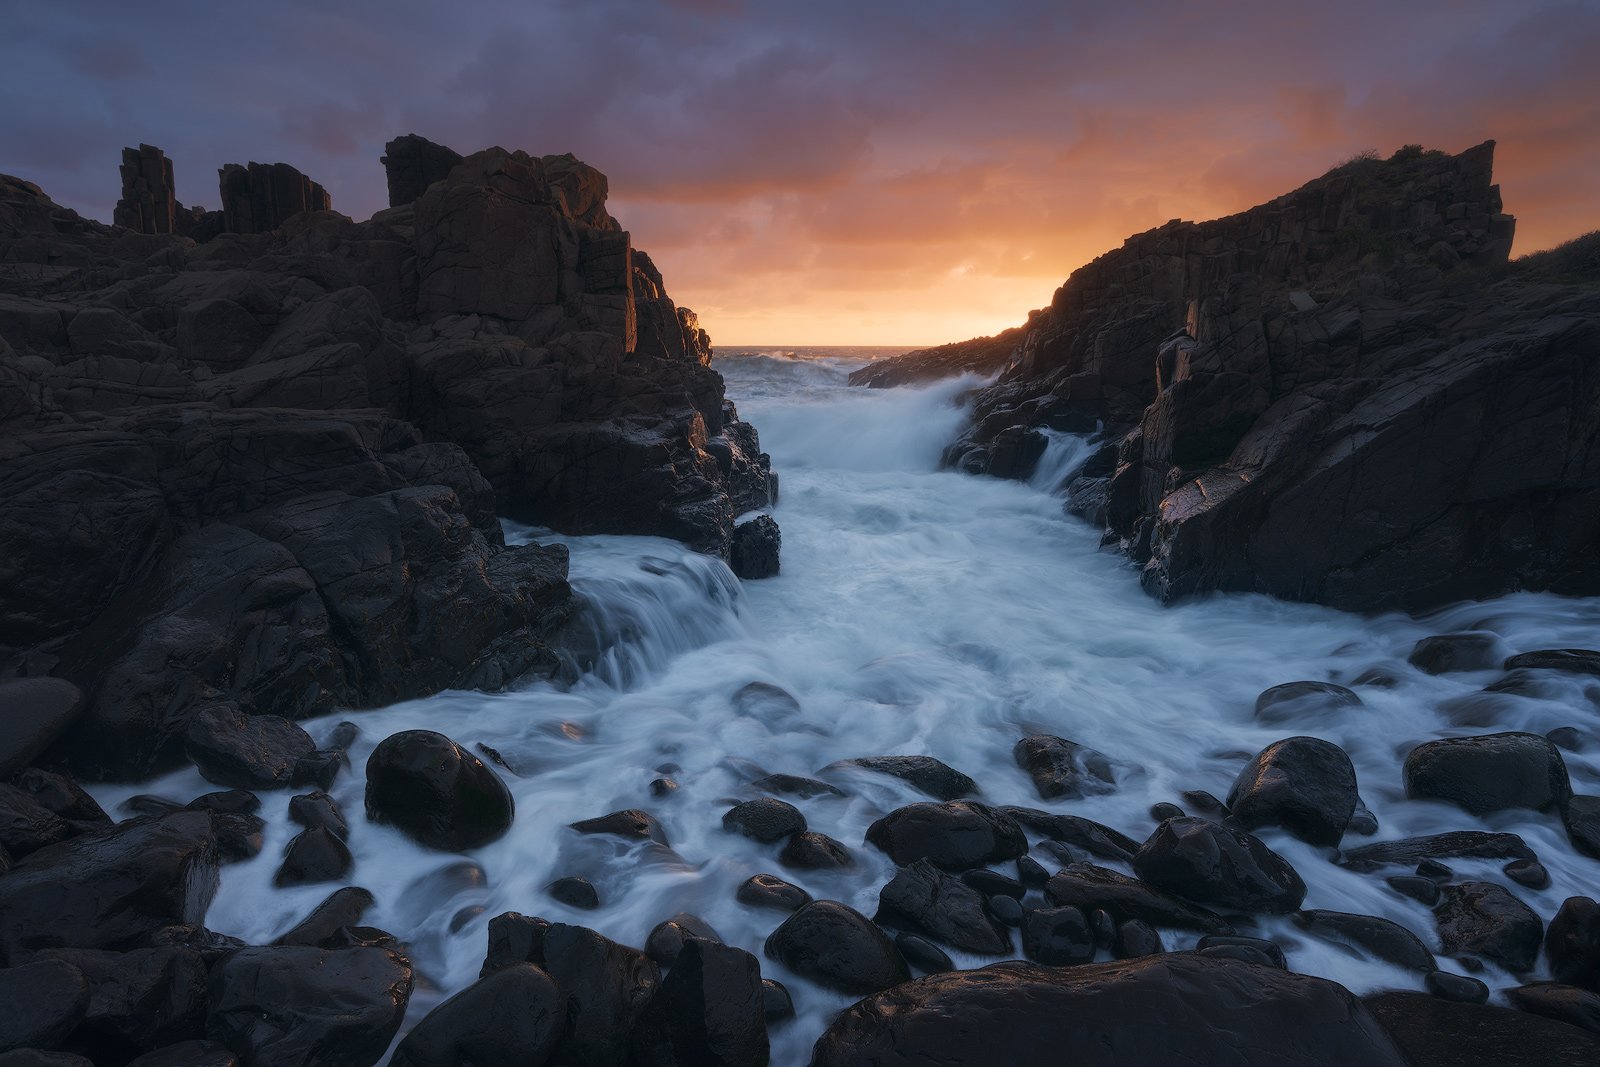 How to photograph during windy conditions